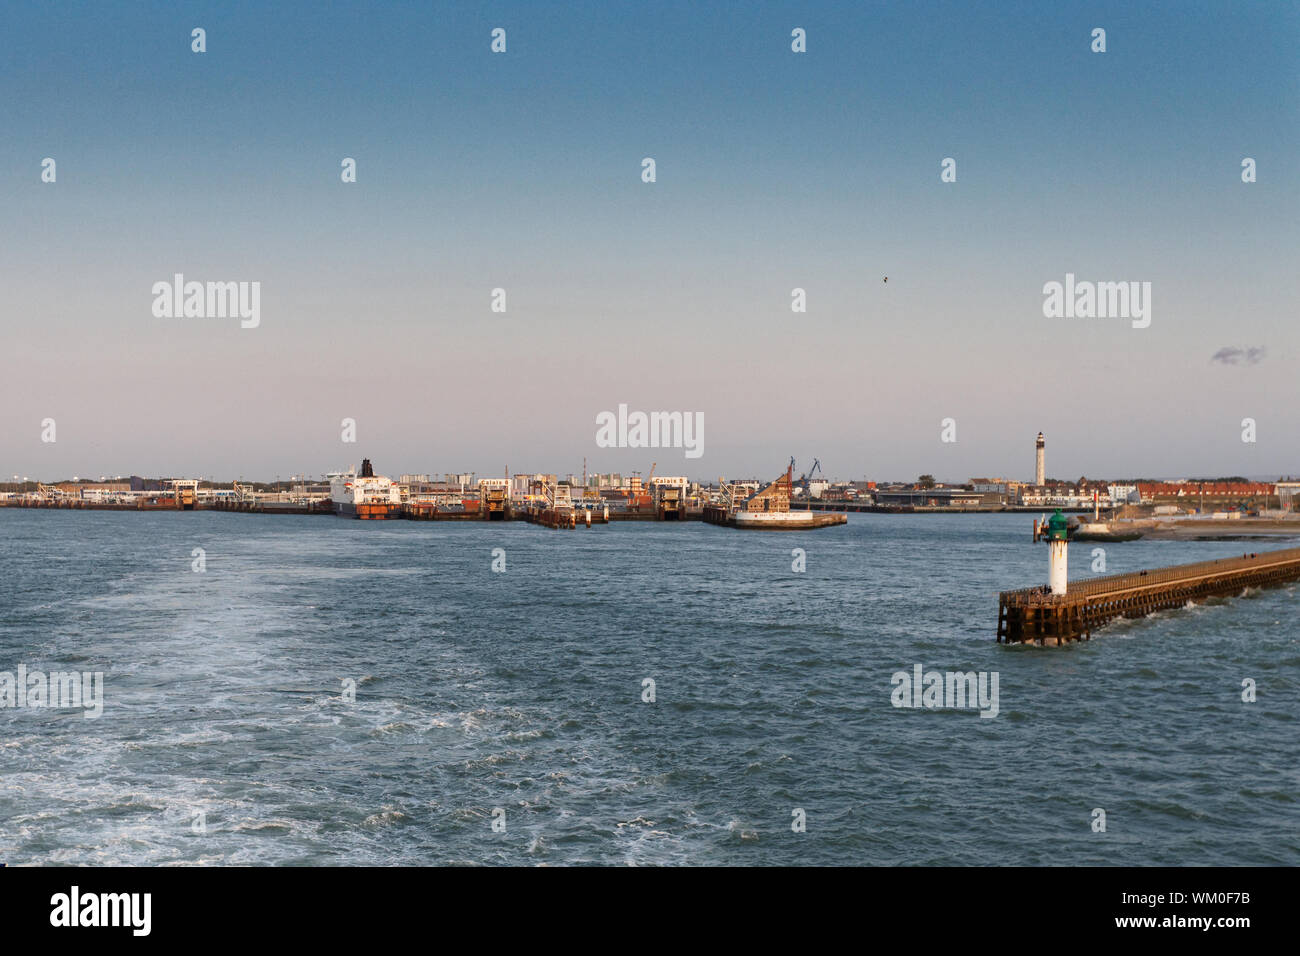 The port of Calais in France Stock Photo